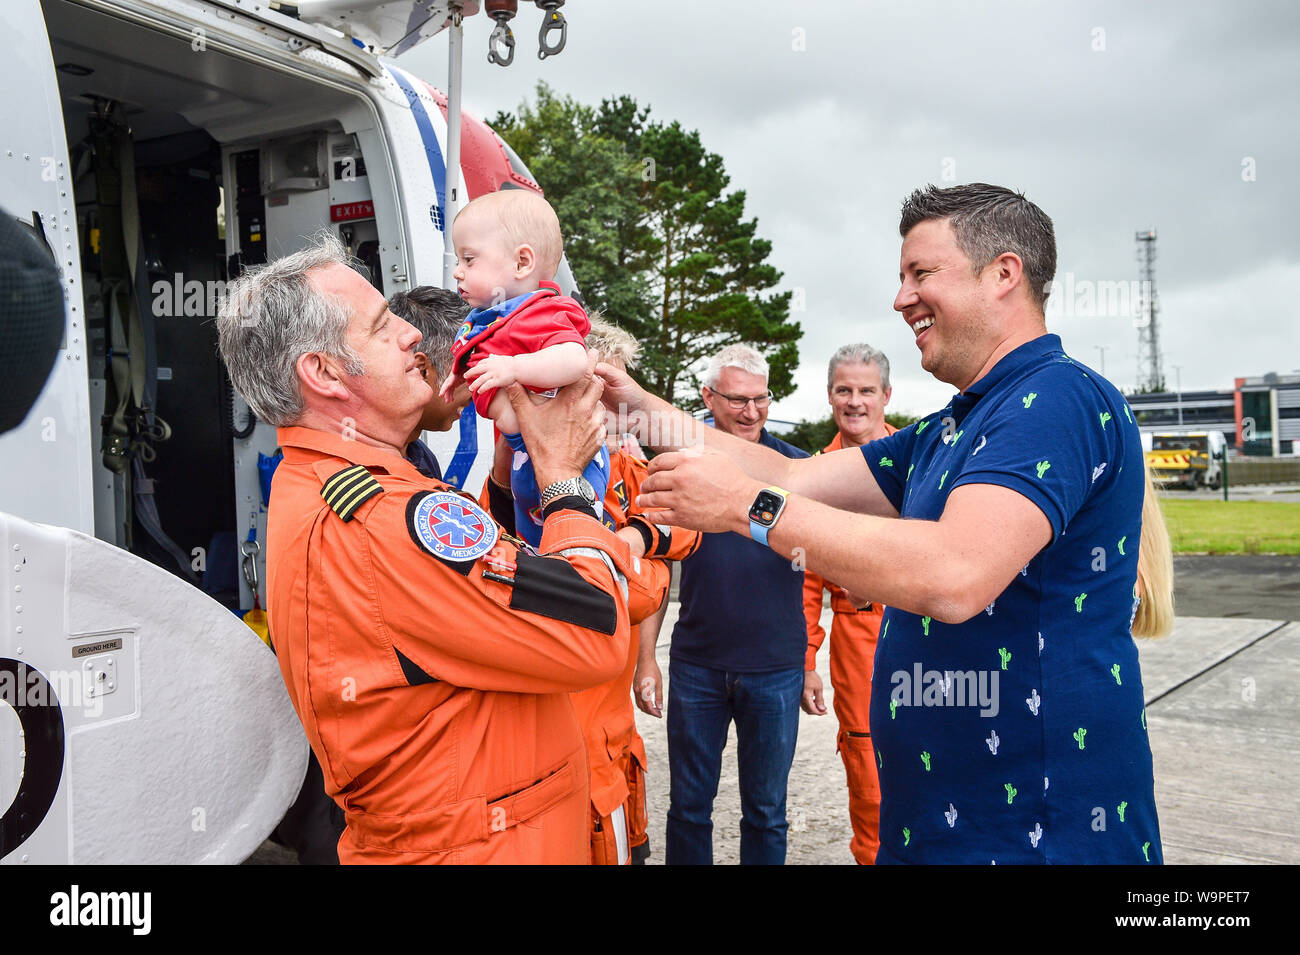 EMBARGOED TO 0001 FRIDAY AUGUST 16 HM Coastguard Chief Crewman Ian Copley lifts one-year-old Jenson Powell from his dad Rich Powell as they meet for the first time in a year since he and his HM Coastguard crew airlifted his wife Jennie (hidden in pic) by helicopter to Oxford from Cornwall after Jennie went into labour at 22 weeks with her twins, giving birth the youngest surviving pre-term twin boys born in Britain. Stock Photo